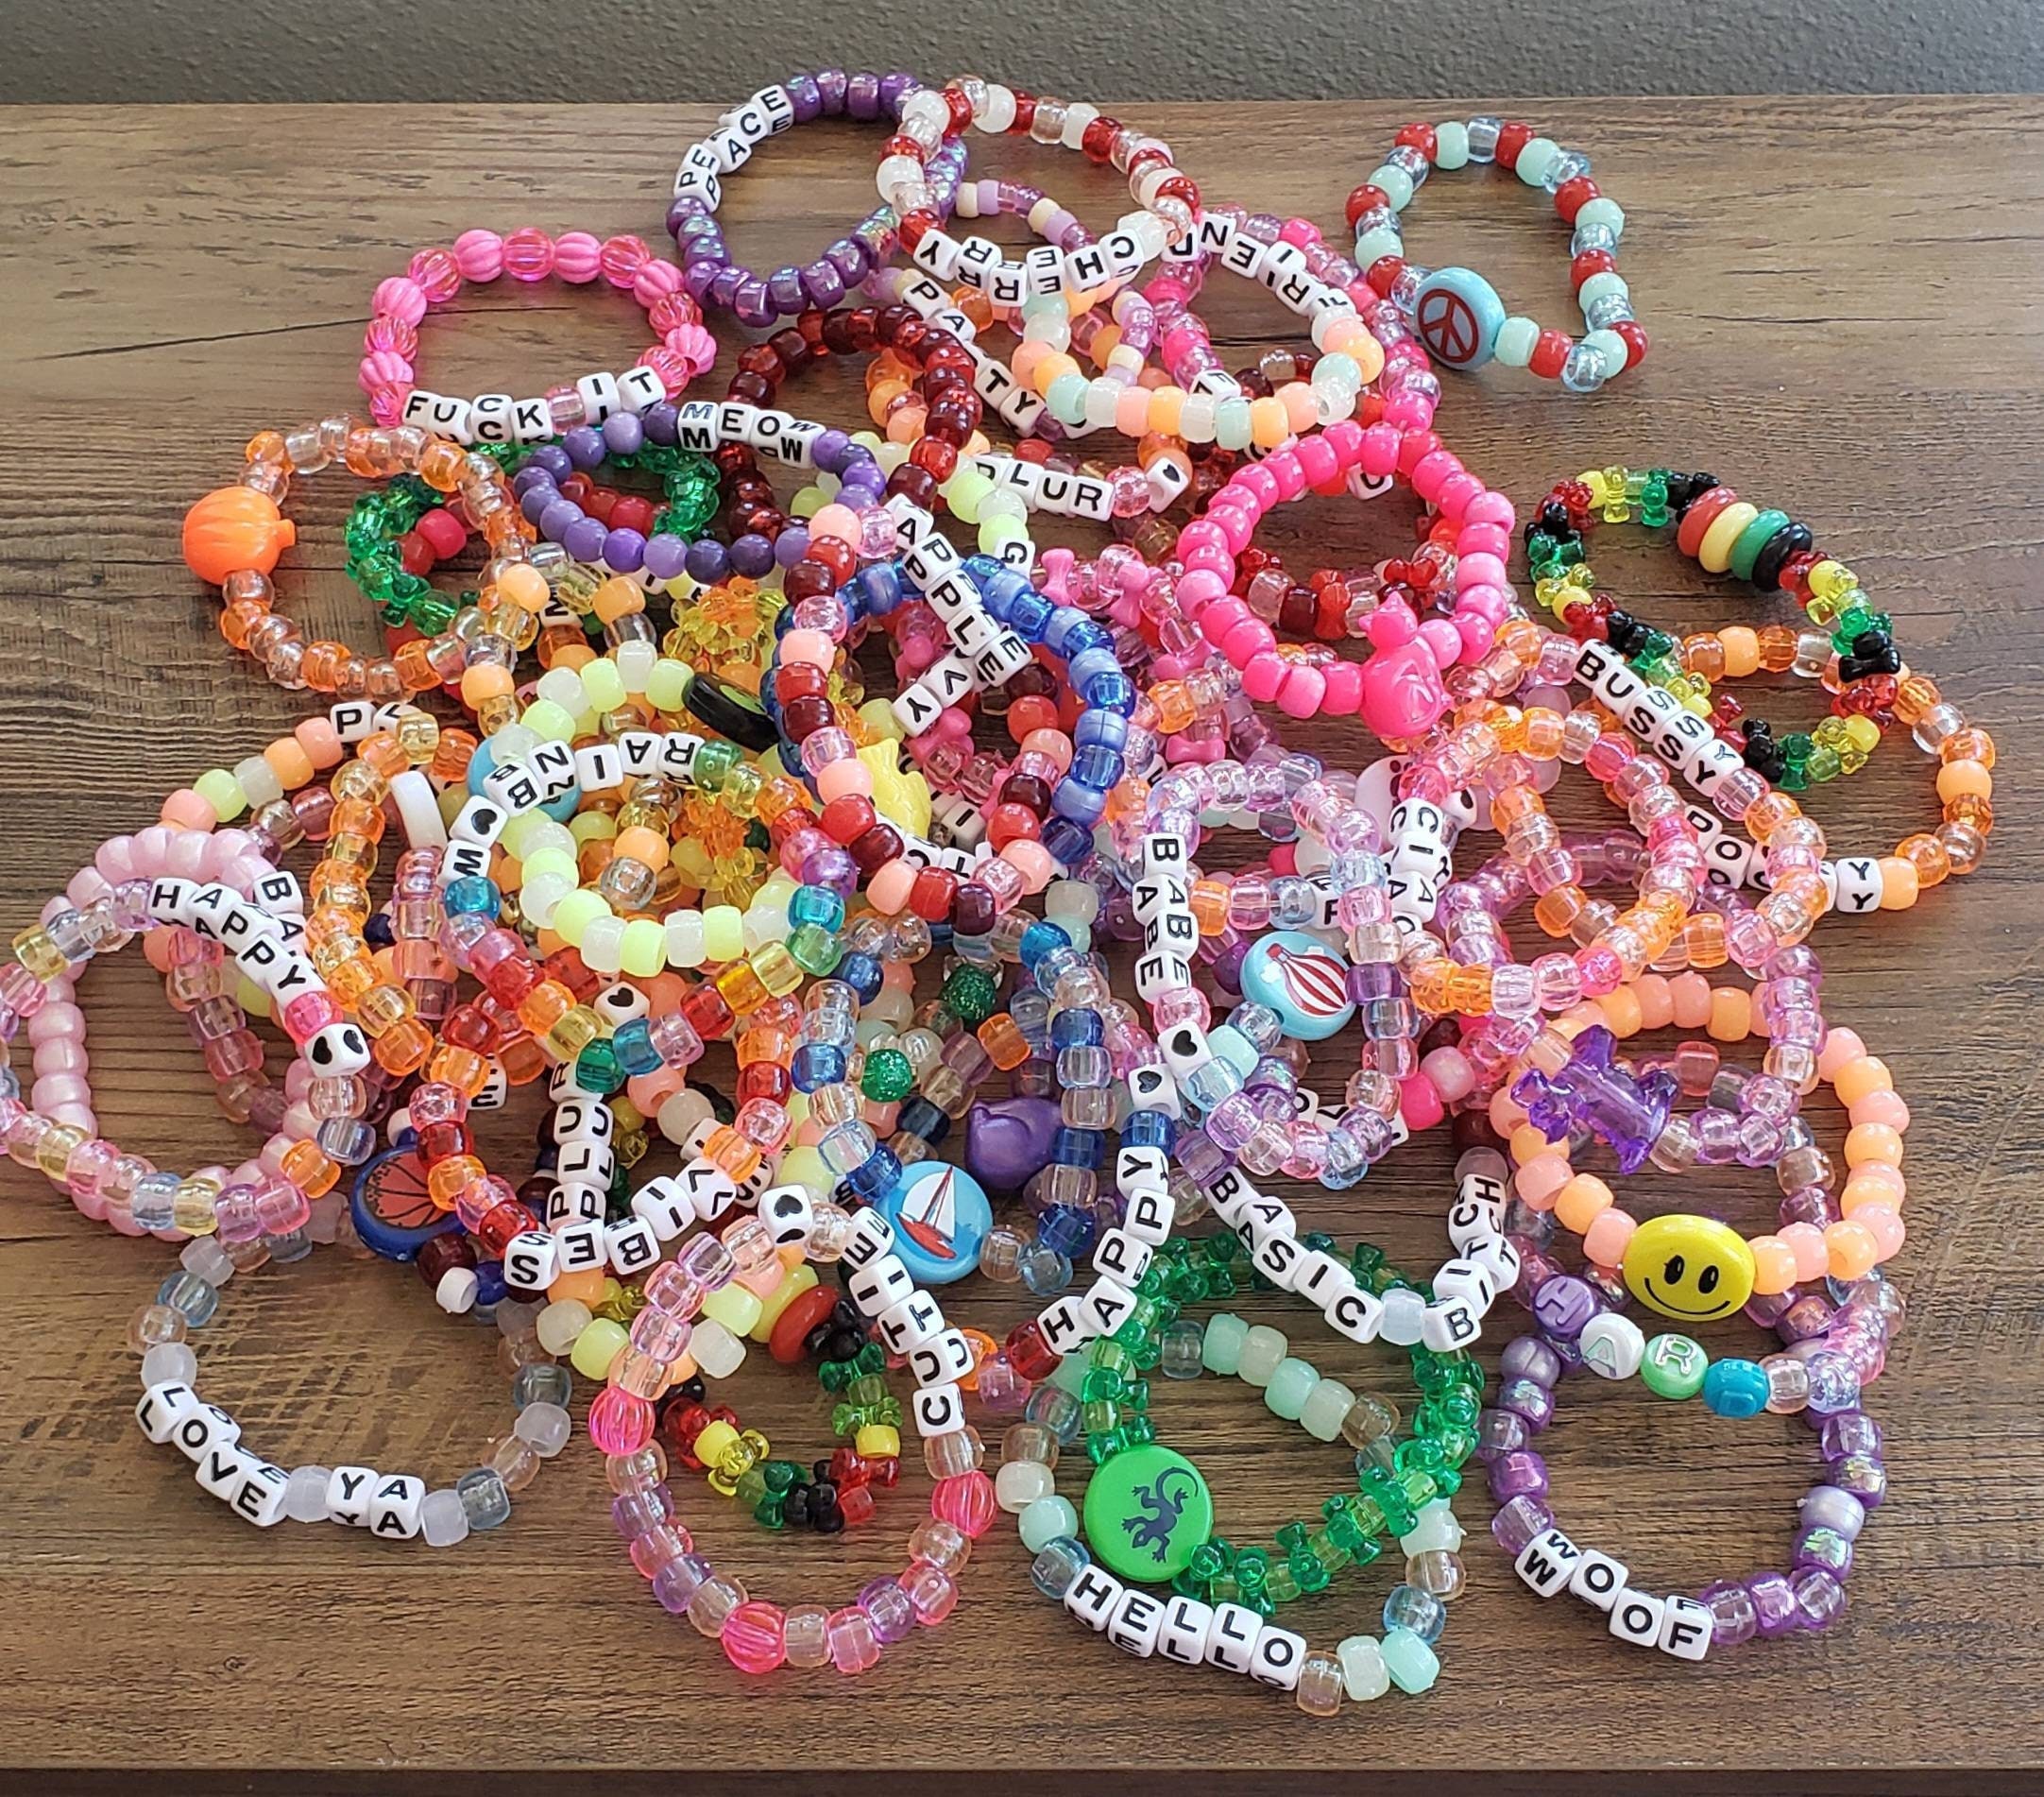 KANDI- questions and suggestions in comments :) : r/bonnaroo